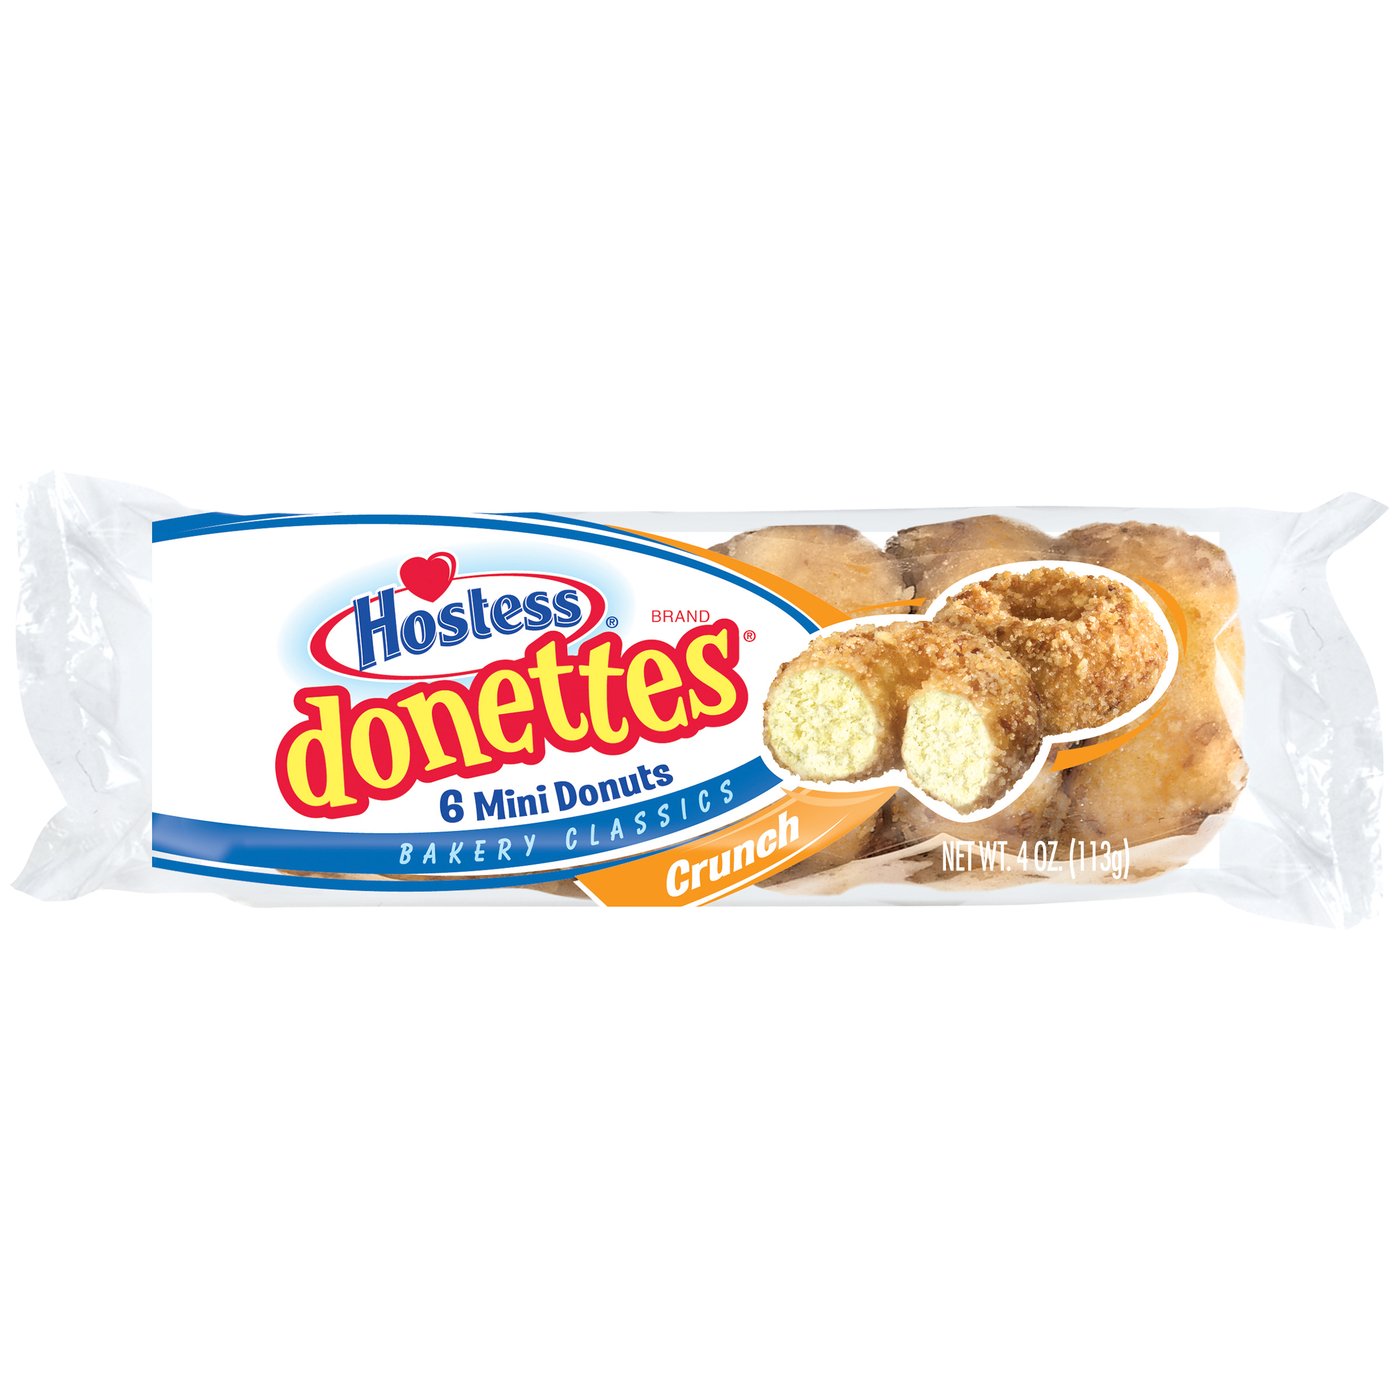 Hostess Crunch Donettes (4oz) - A Taste of the States